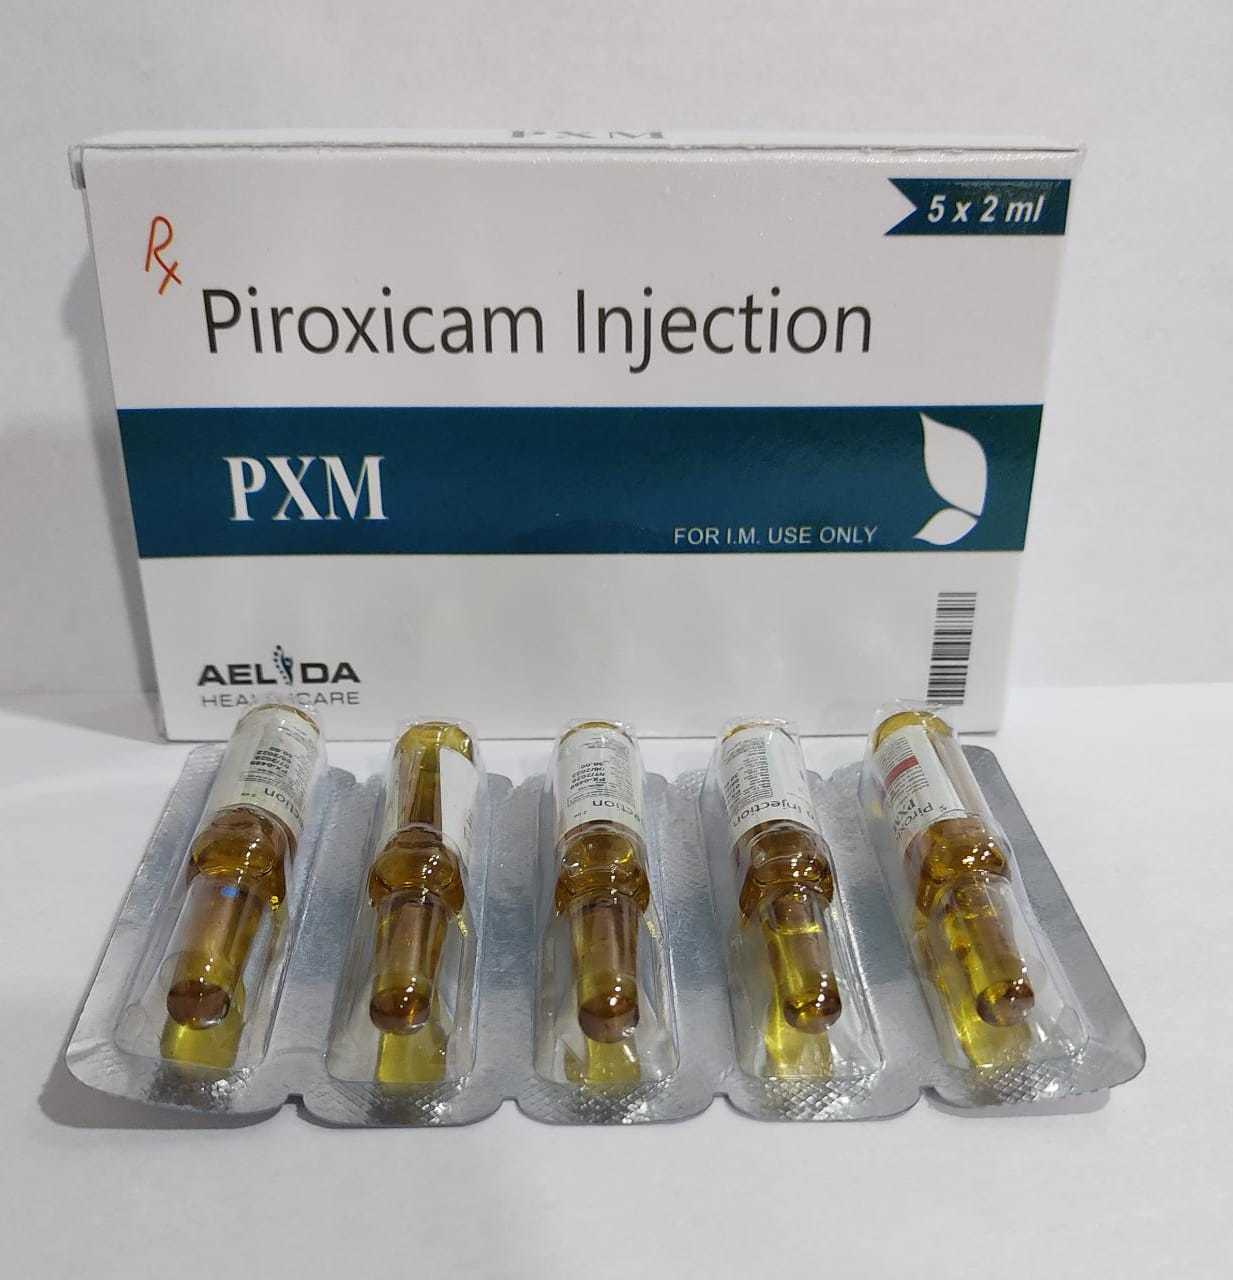 PIROXICAM INJECTION